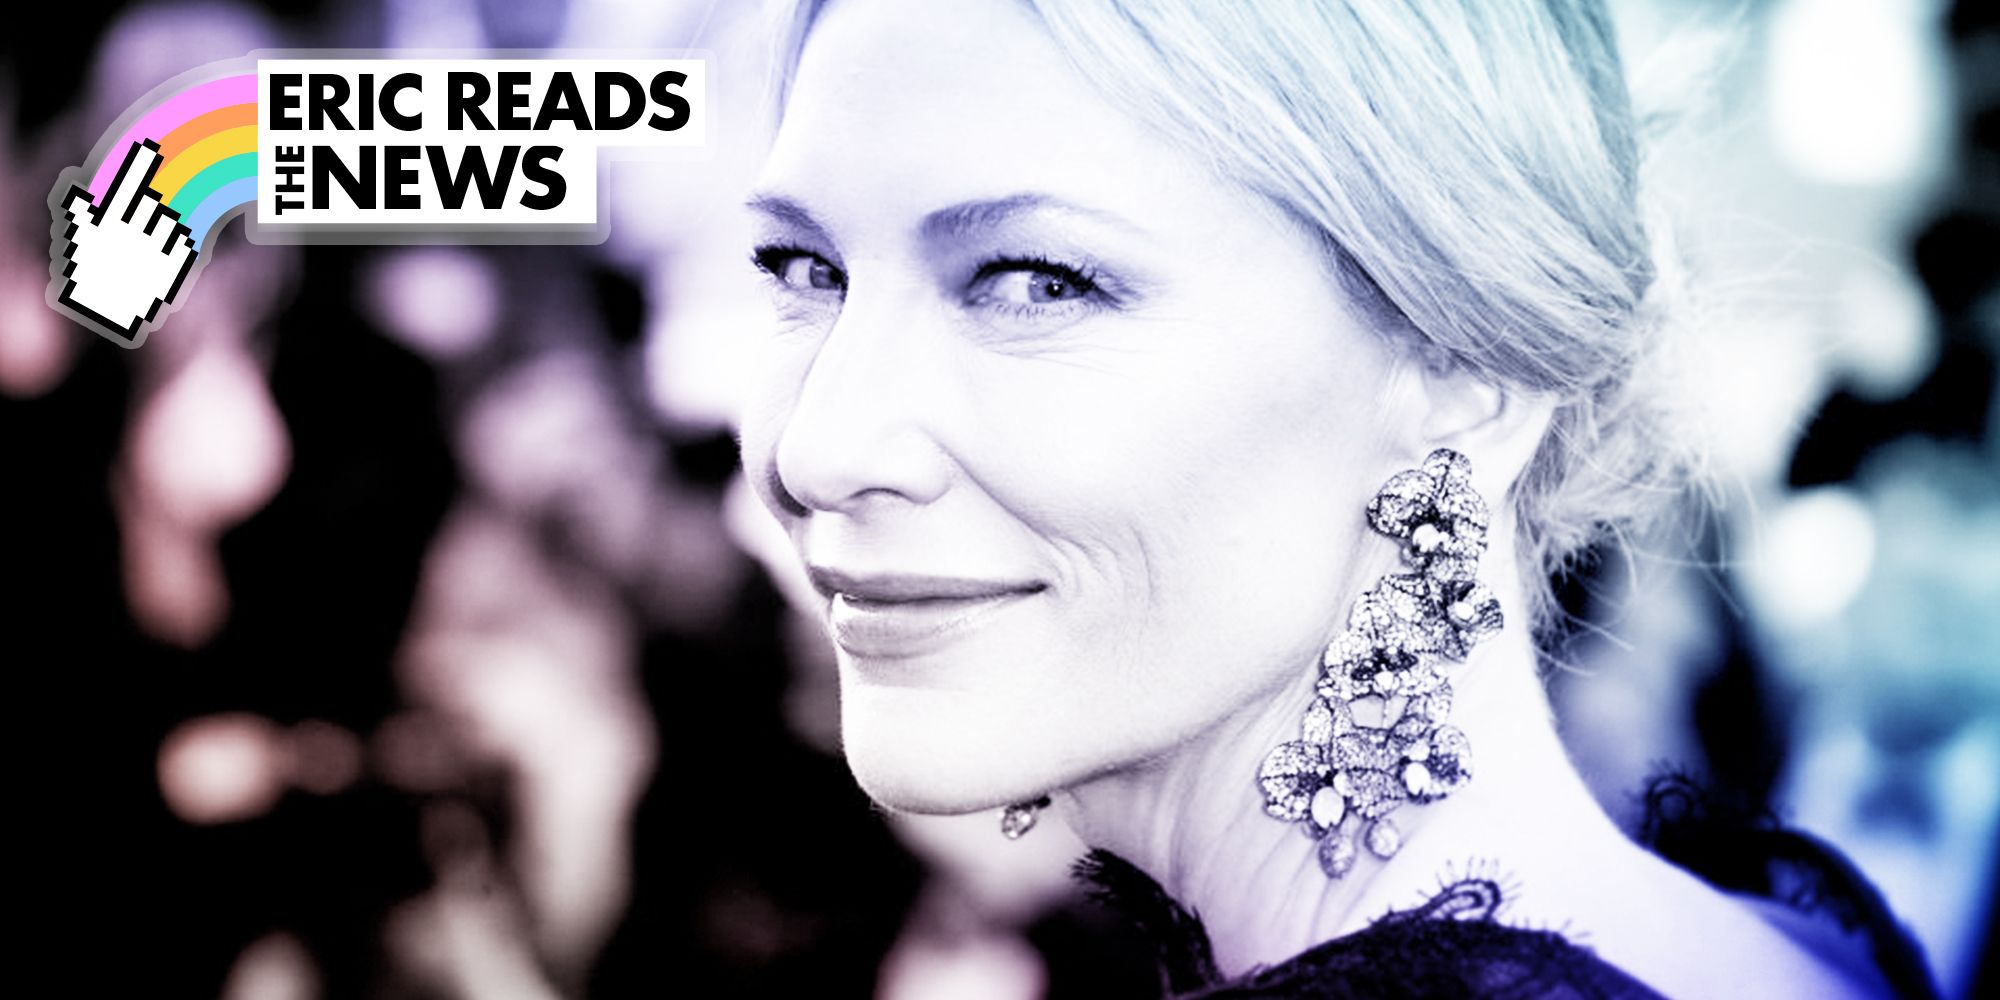 Cate Blanchett  Never Mind the Film Festival, All the Fashion at